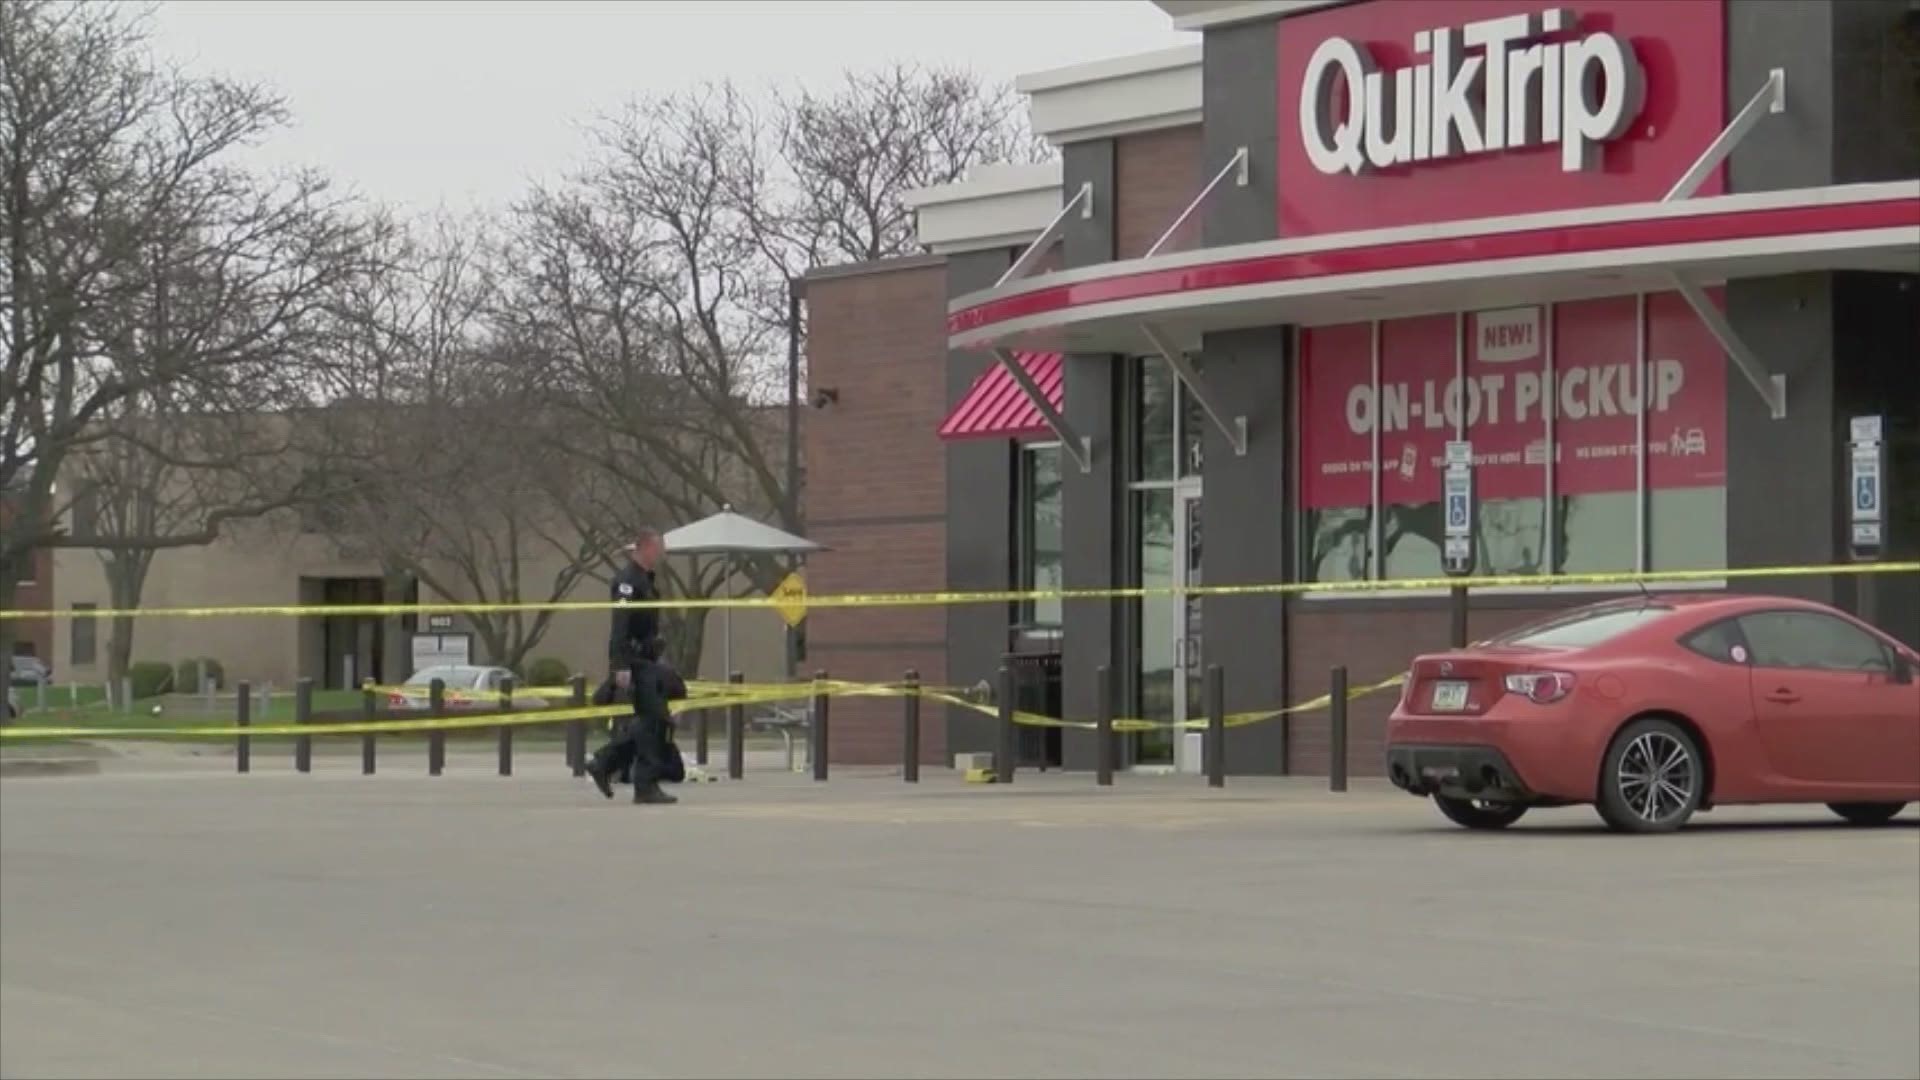 Officers were called to the QuikTrip near 22nd Street and I-235 Thursday.